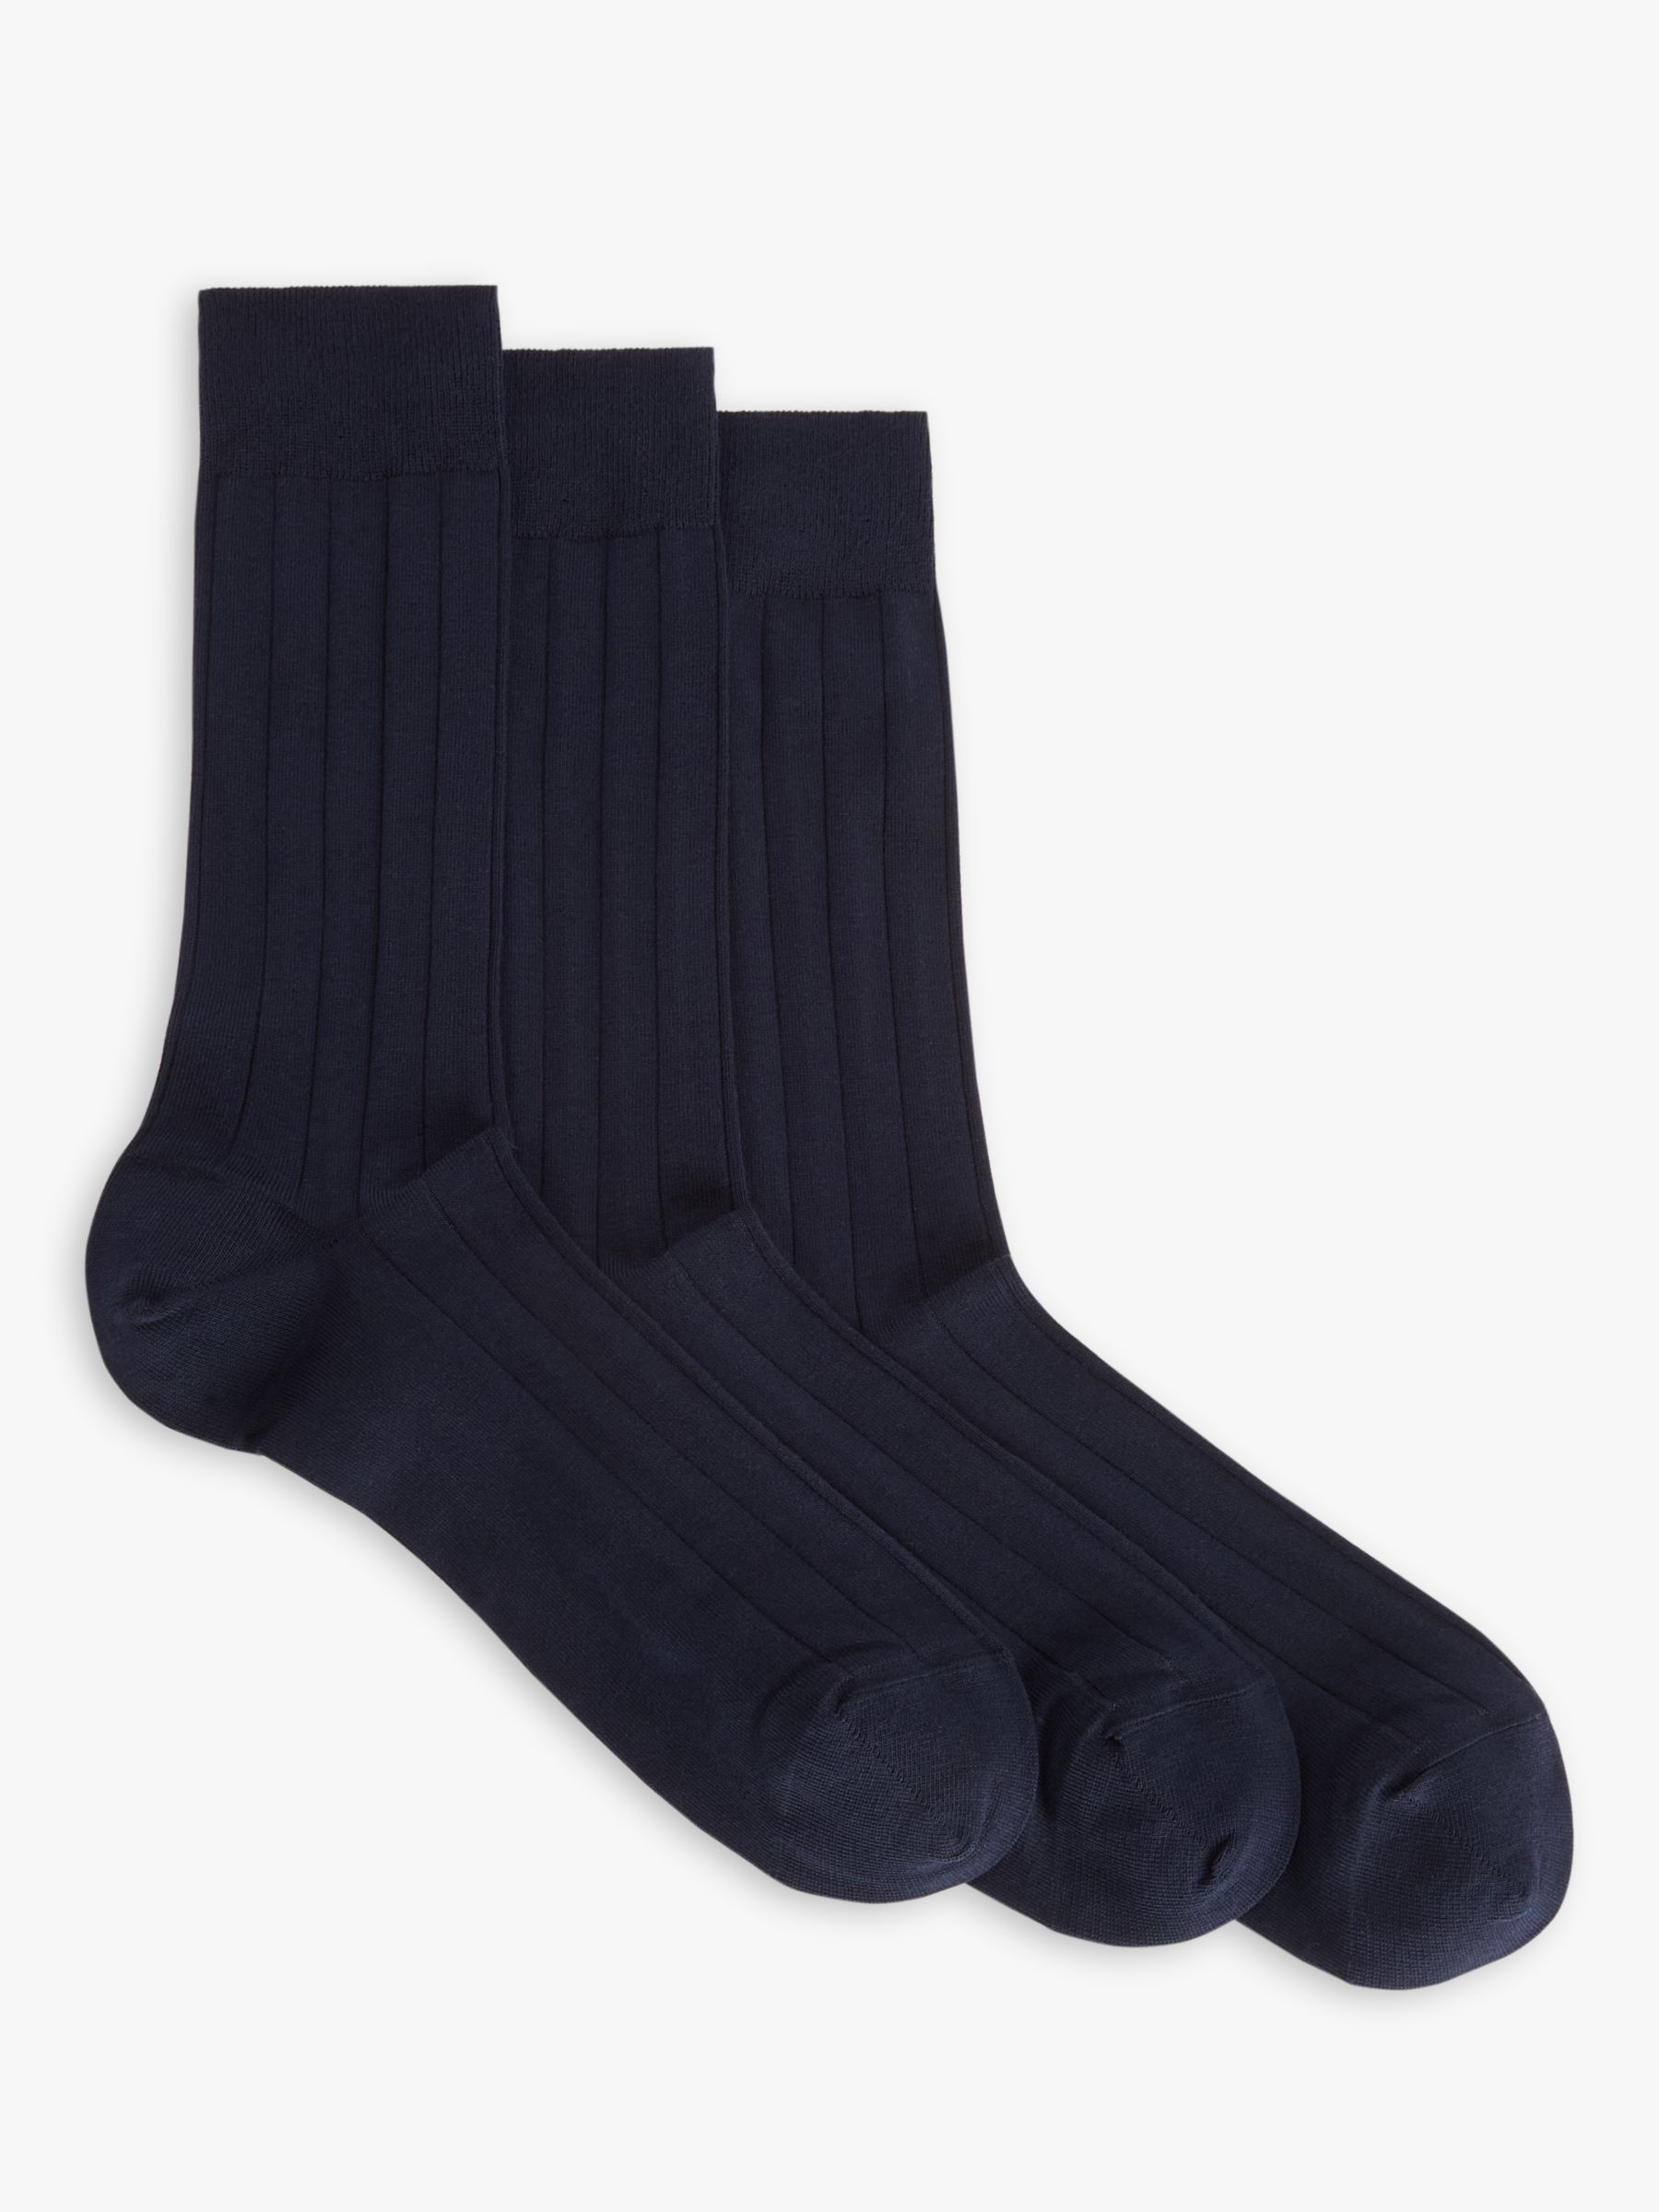 John Lewis Made in Italy Cotton Socks, Pack of 3, Navy Blue at John ...